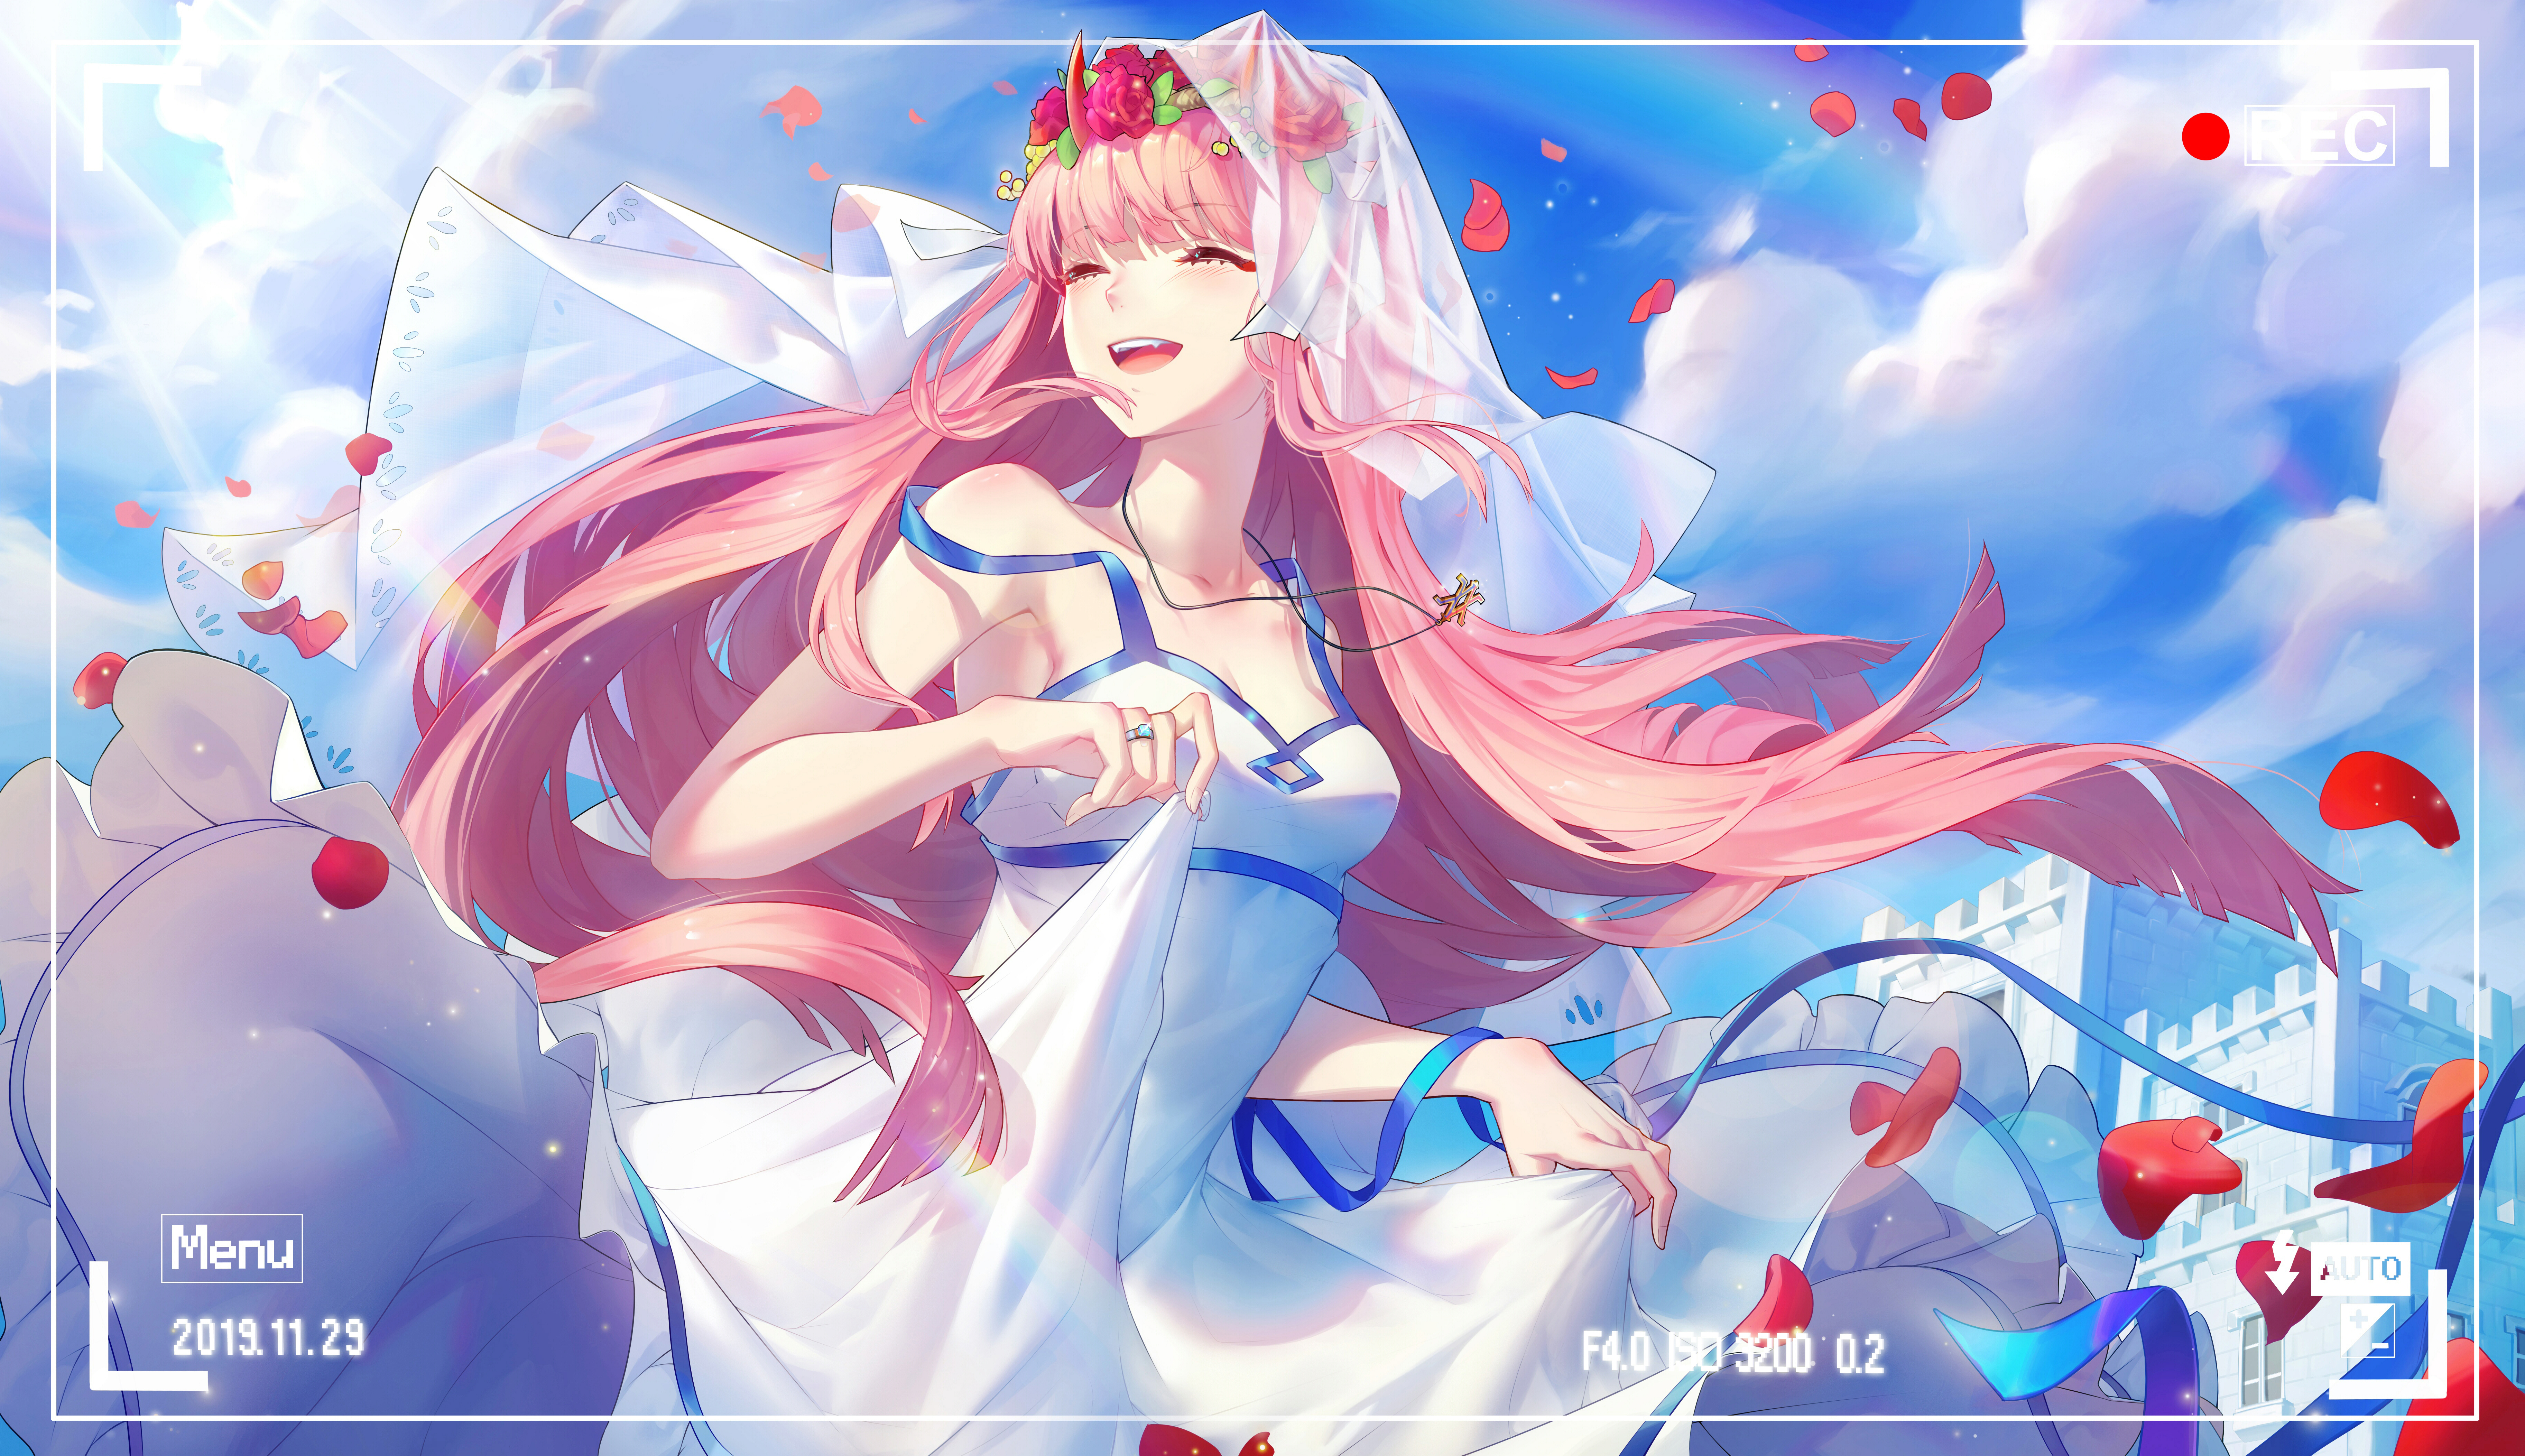 Anime 7302x4211 Darling in the FranXX Zero Two (Darling in the FranXX) anime girls dress wedding dress petals sky clouds sunlight closed eyes long hair rainbows camera building hair blowing in the wind pink hair